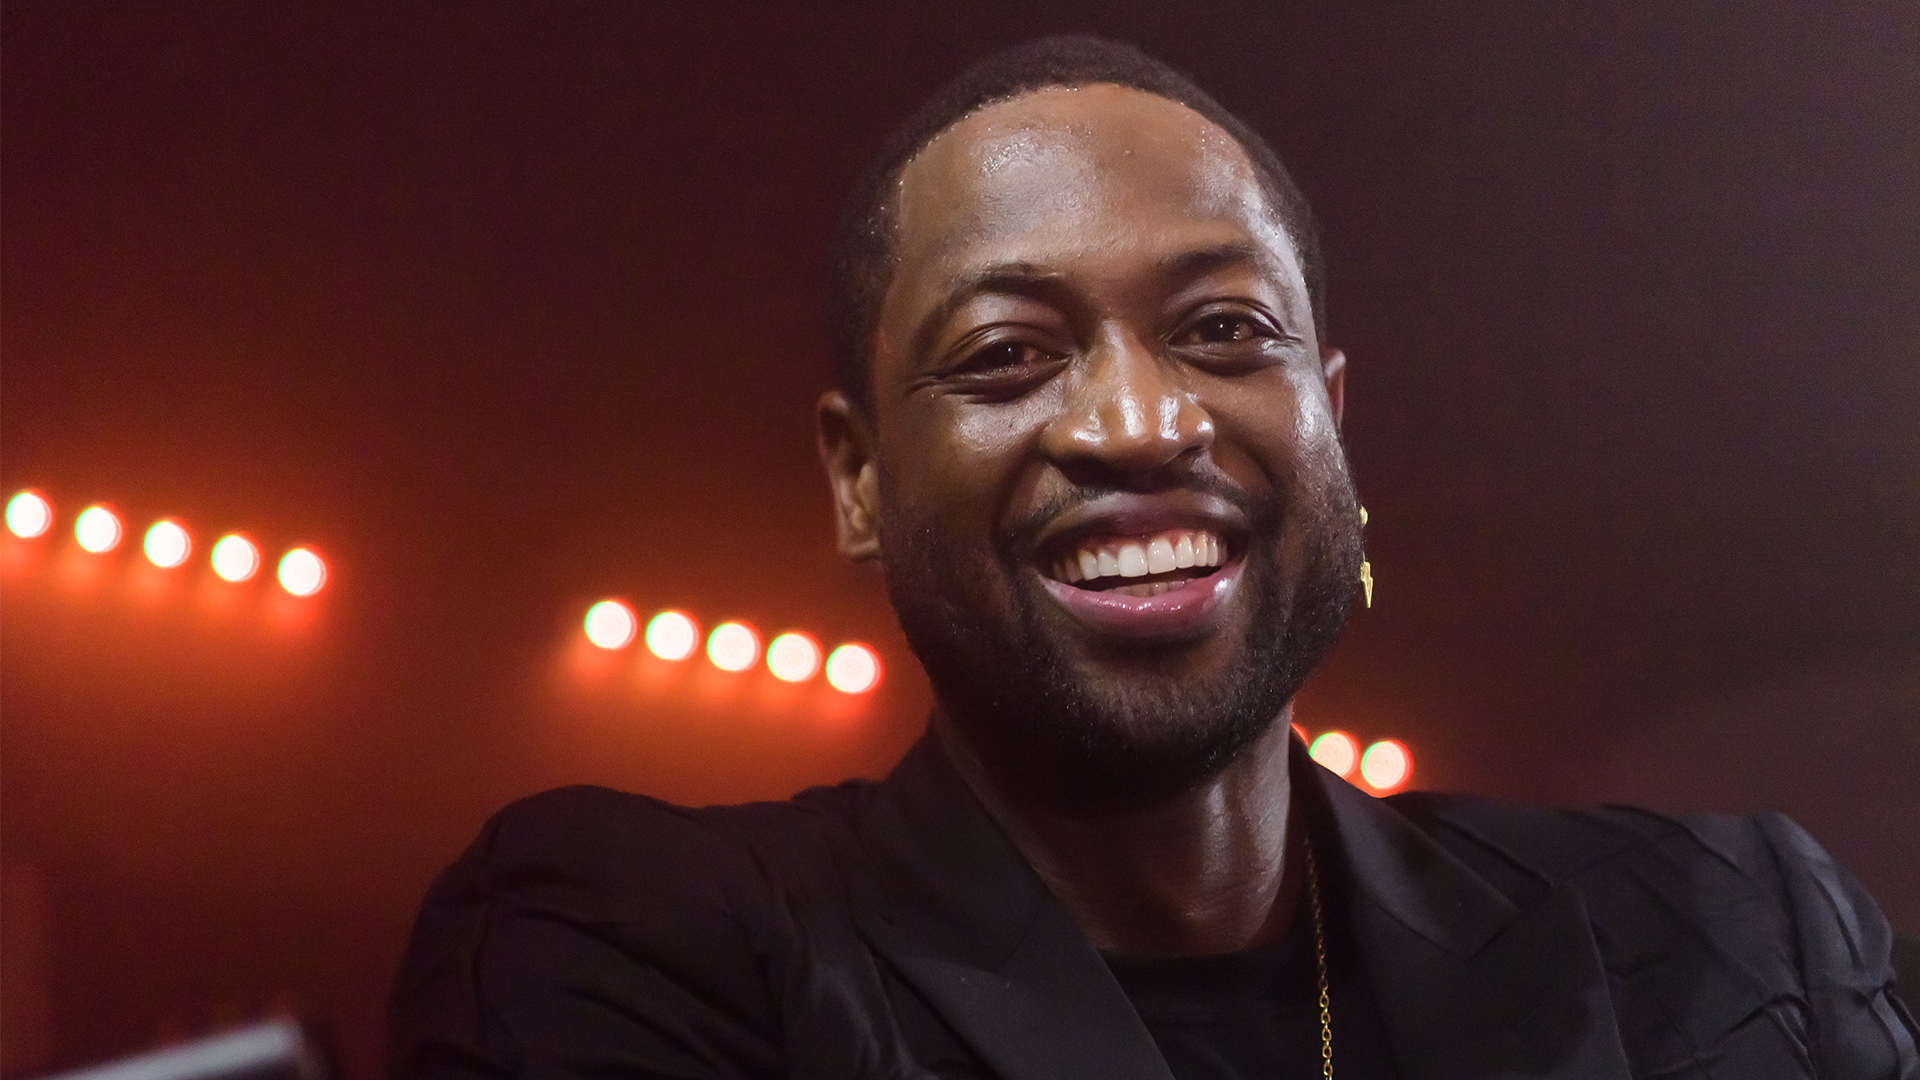 Dwyane Wade Ventures Into The Cannabis Industry With An Exclusive Line